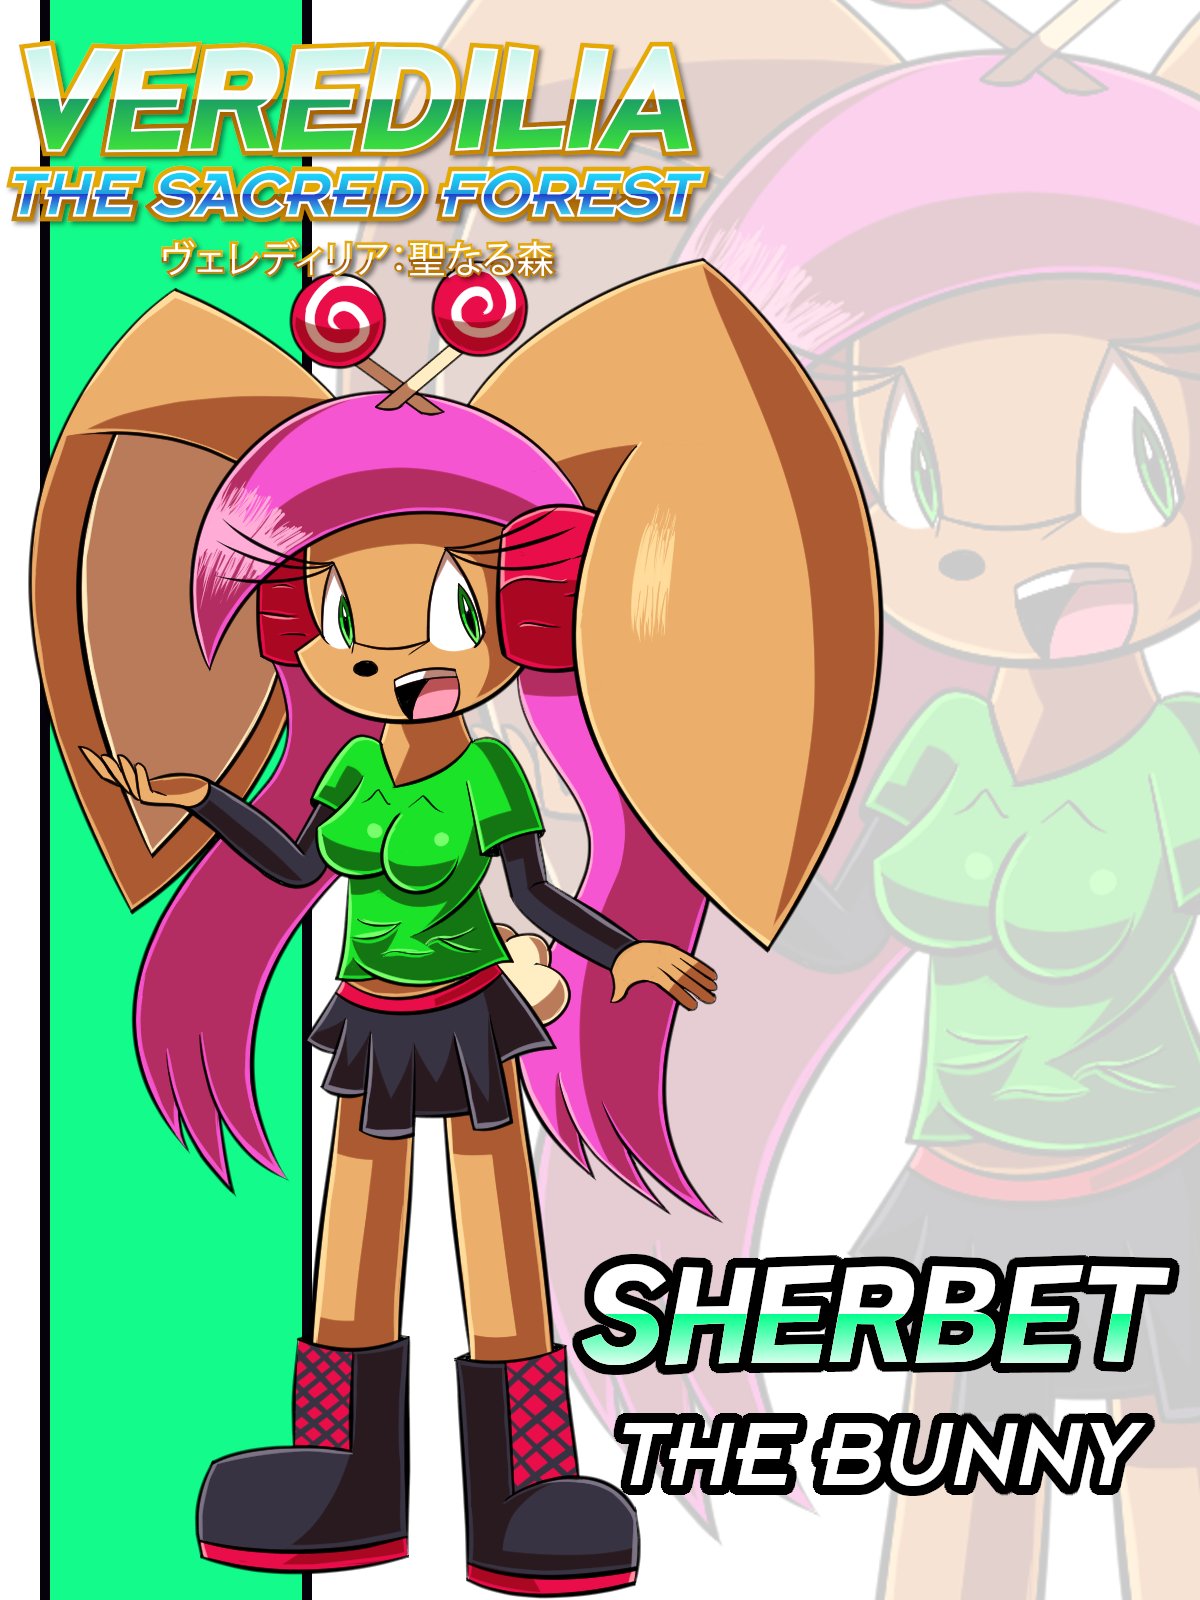 Daisy Rose Voice Actor on X: Excited to announce I'll be voicing Sherbert  in Veredillia: The Sacred Forest!!🌲 the cutest Bunny that ever was 🐰🙈 /  X